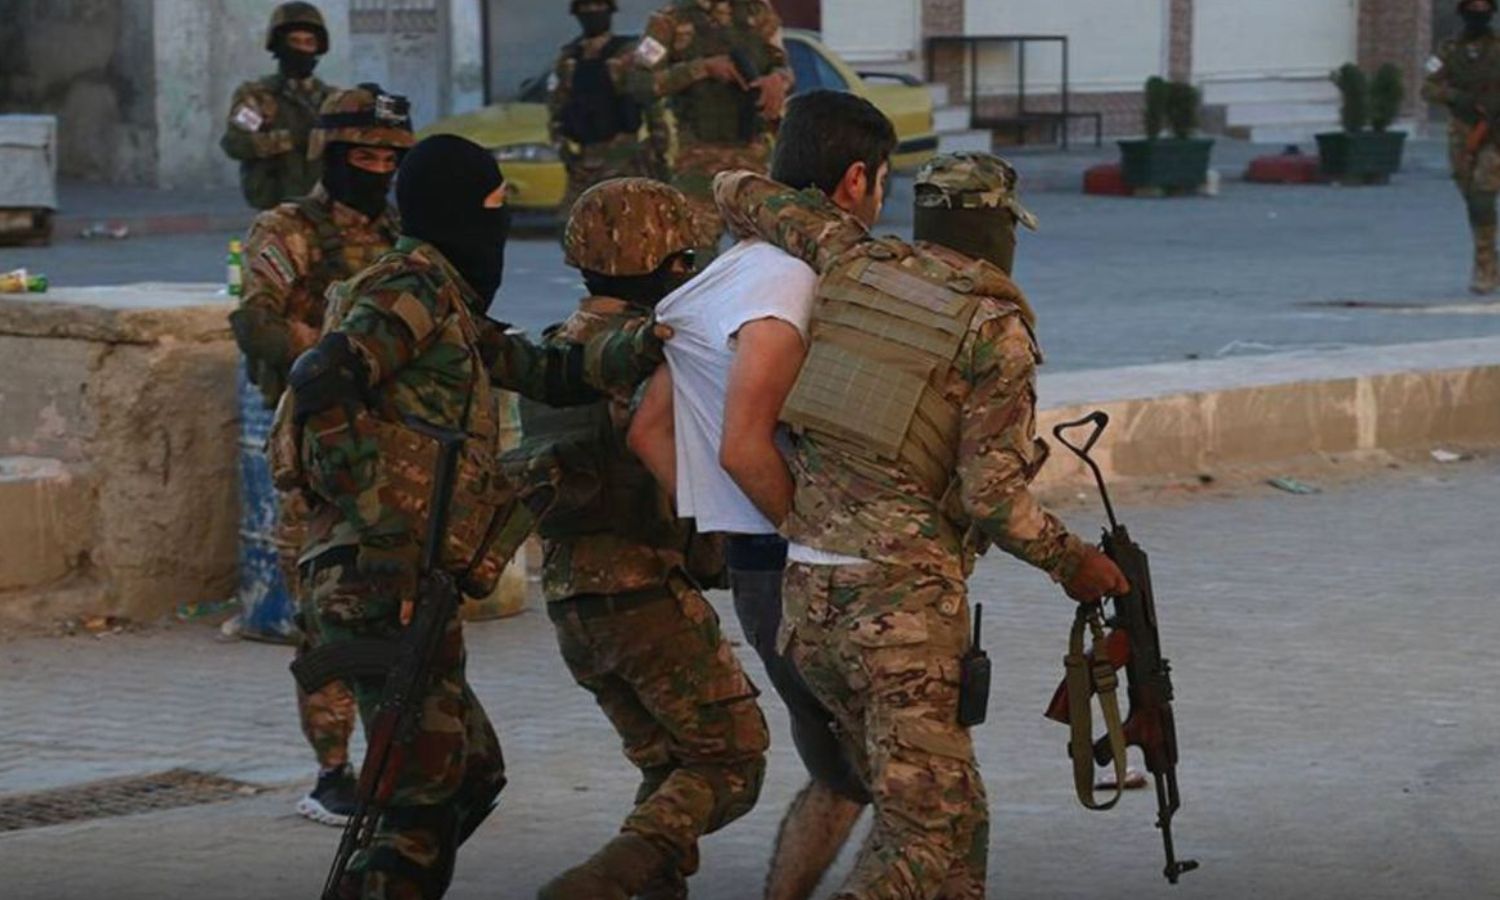 Members of the Syrian National Army (SNA) arresting a wanted person during a security campaign - 15 July 2021 (Azm / Twitter)